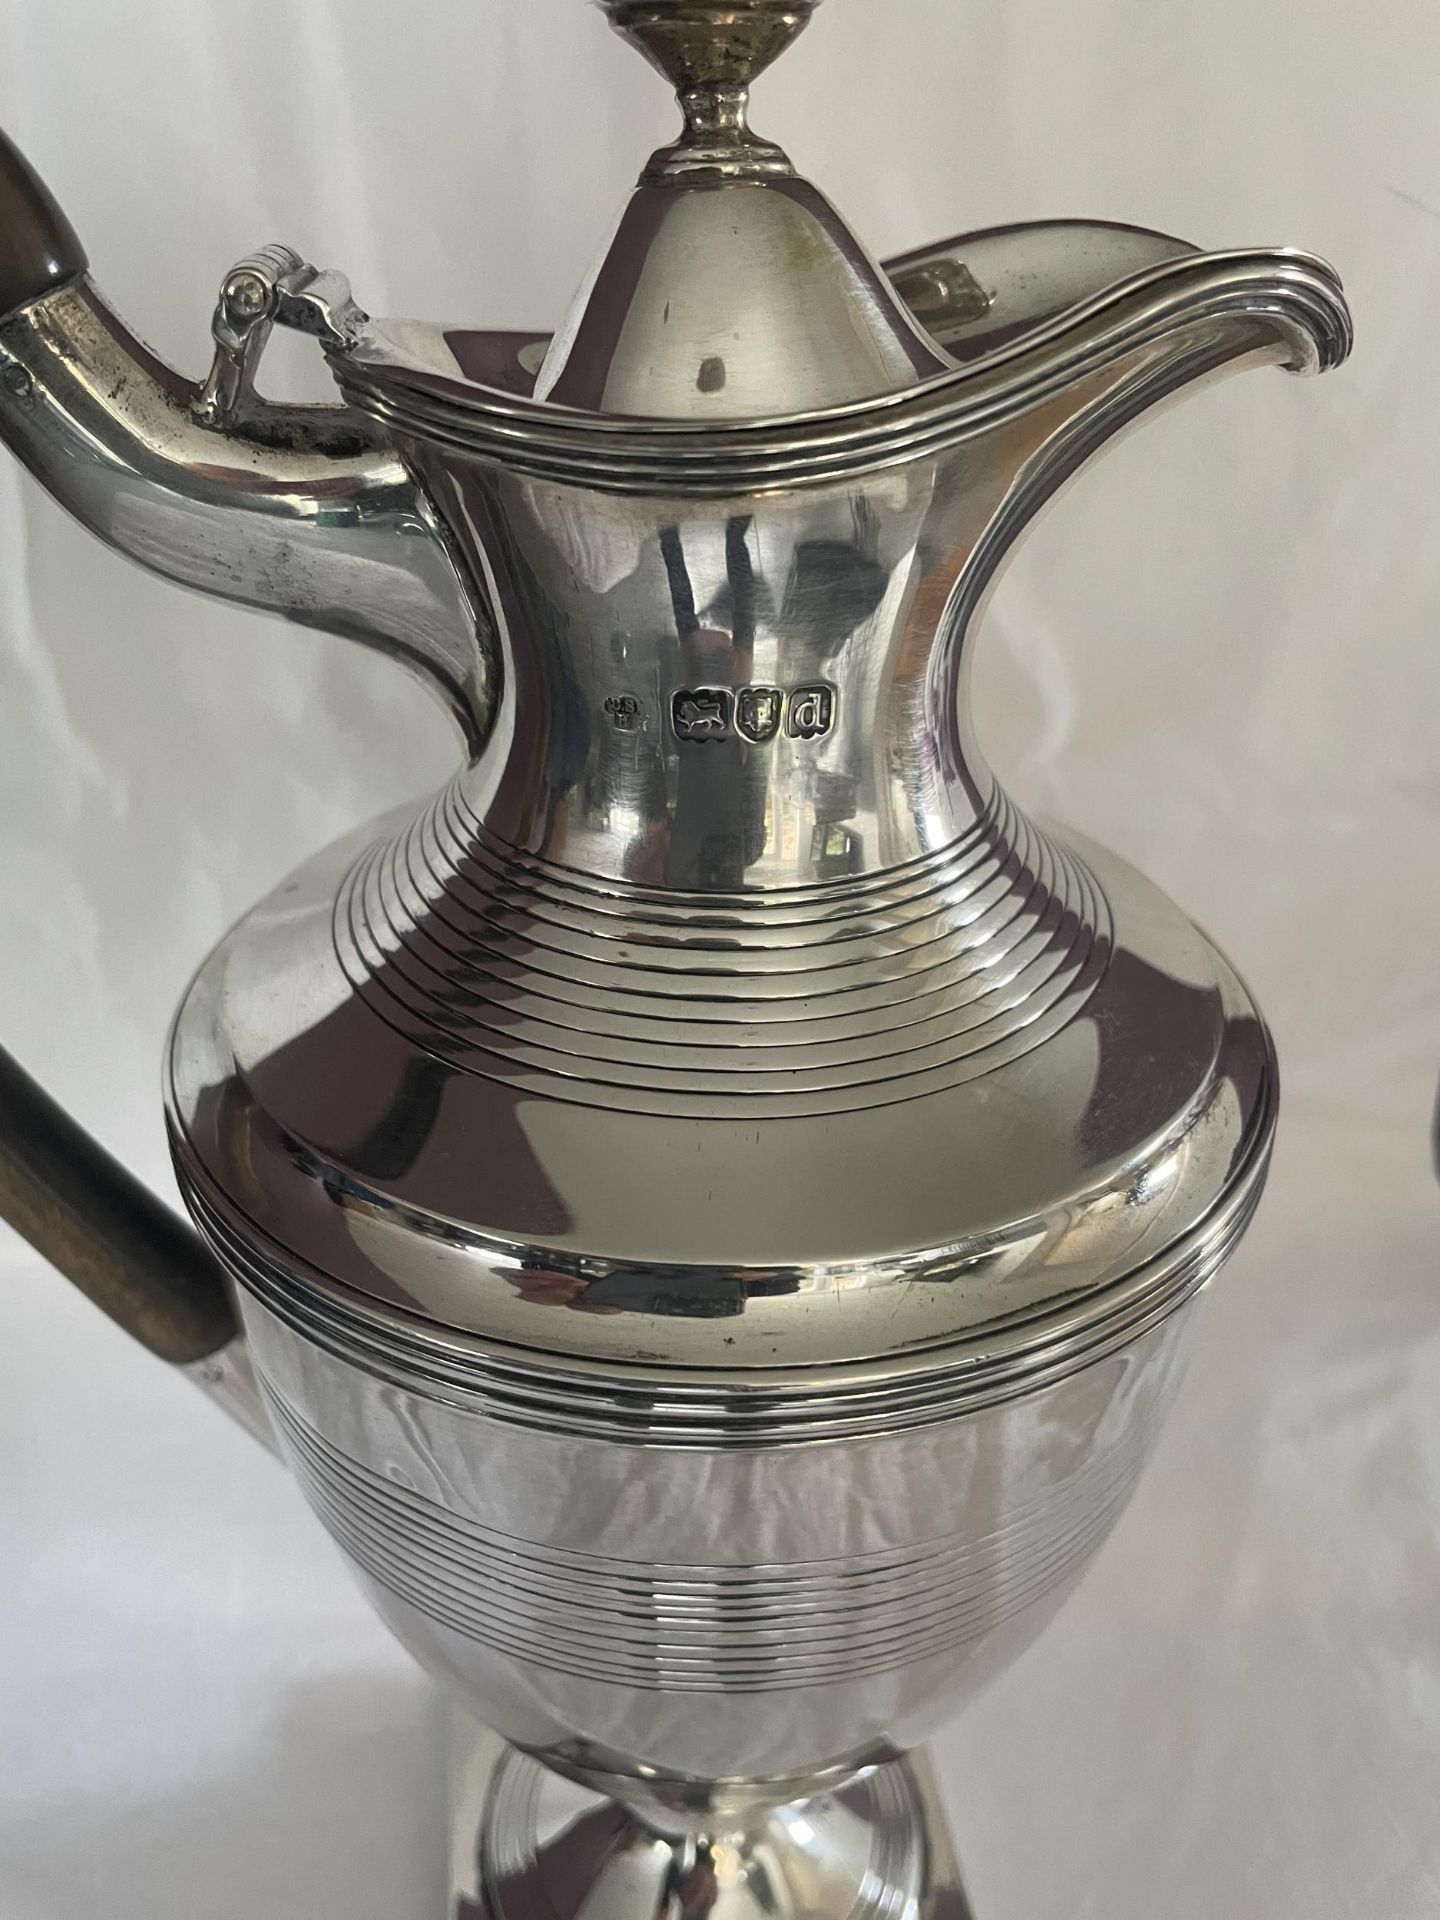 A HALLMARKED 1819 LONDON SILVER CLARET JUG WITH FRUIT WOOD HANDLE, MAKER C S HARRIS AND SONS LTD - - Image 4 of 7